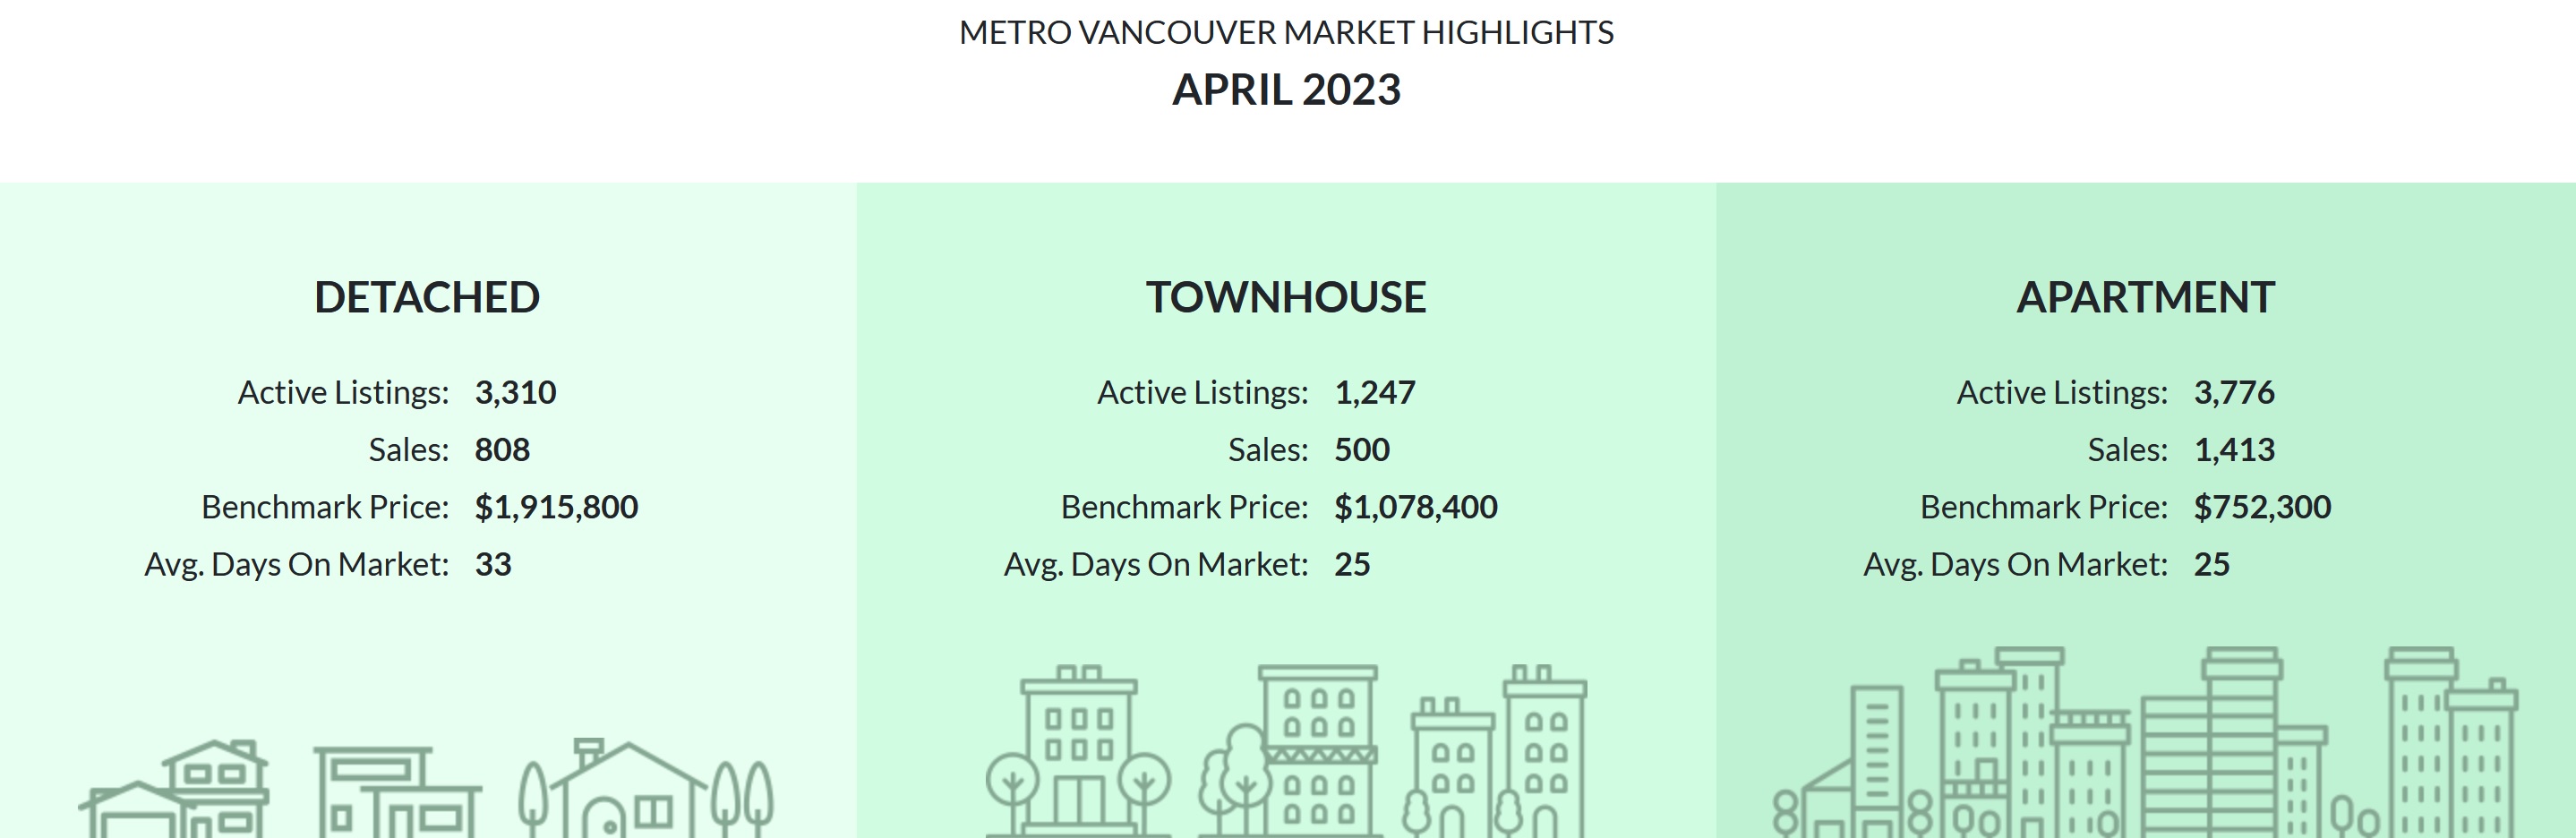 Metro Vancouver April Highlights